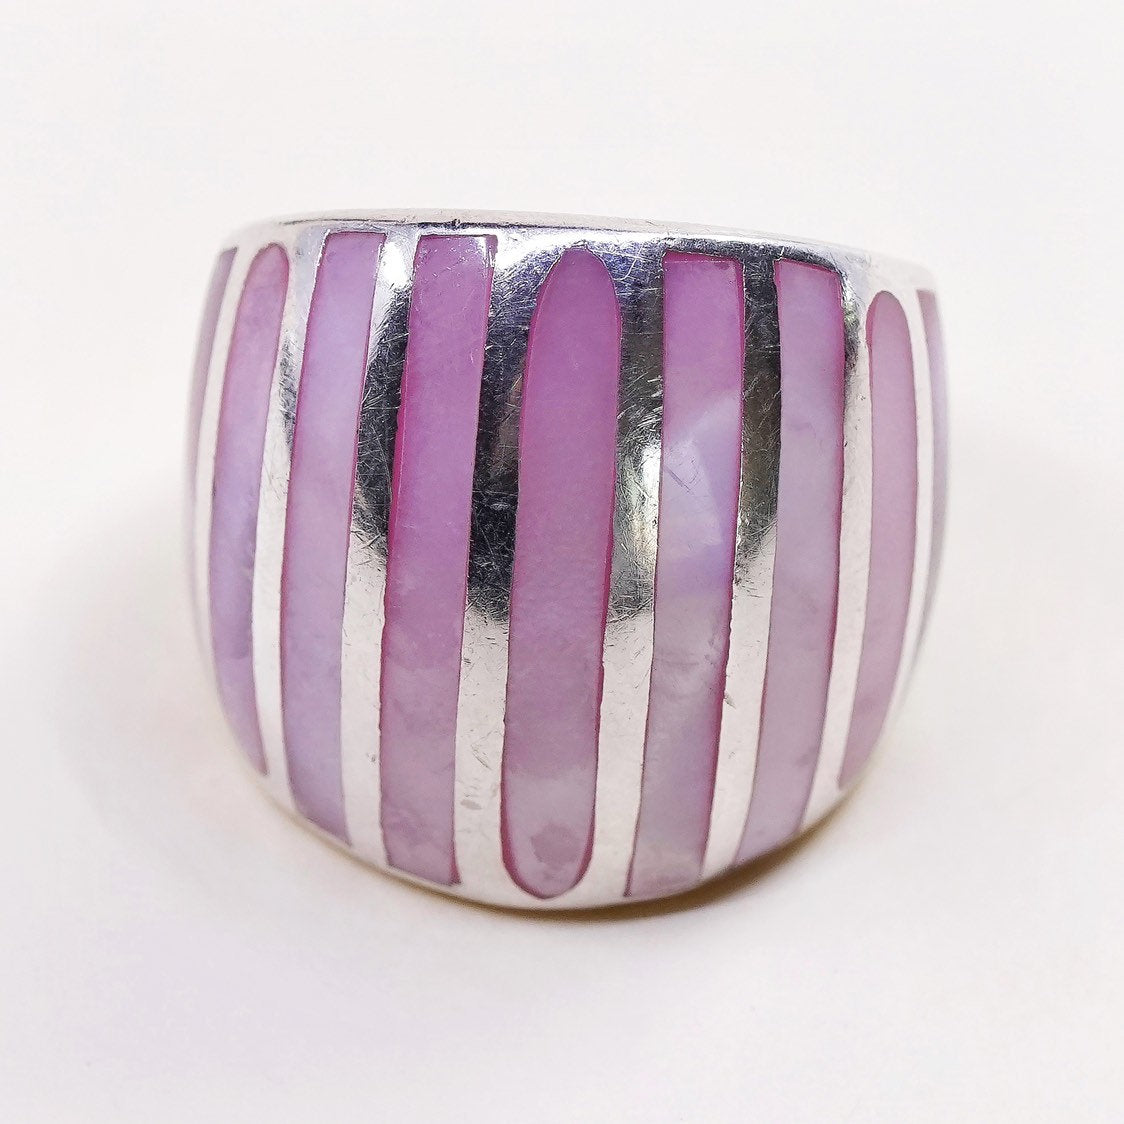 sz 7.5, sterling 925 silver handmade ring band w/ pink mother of pearl stripes